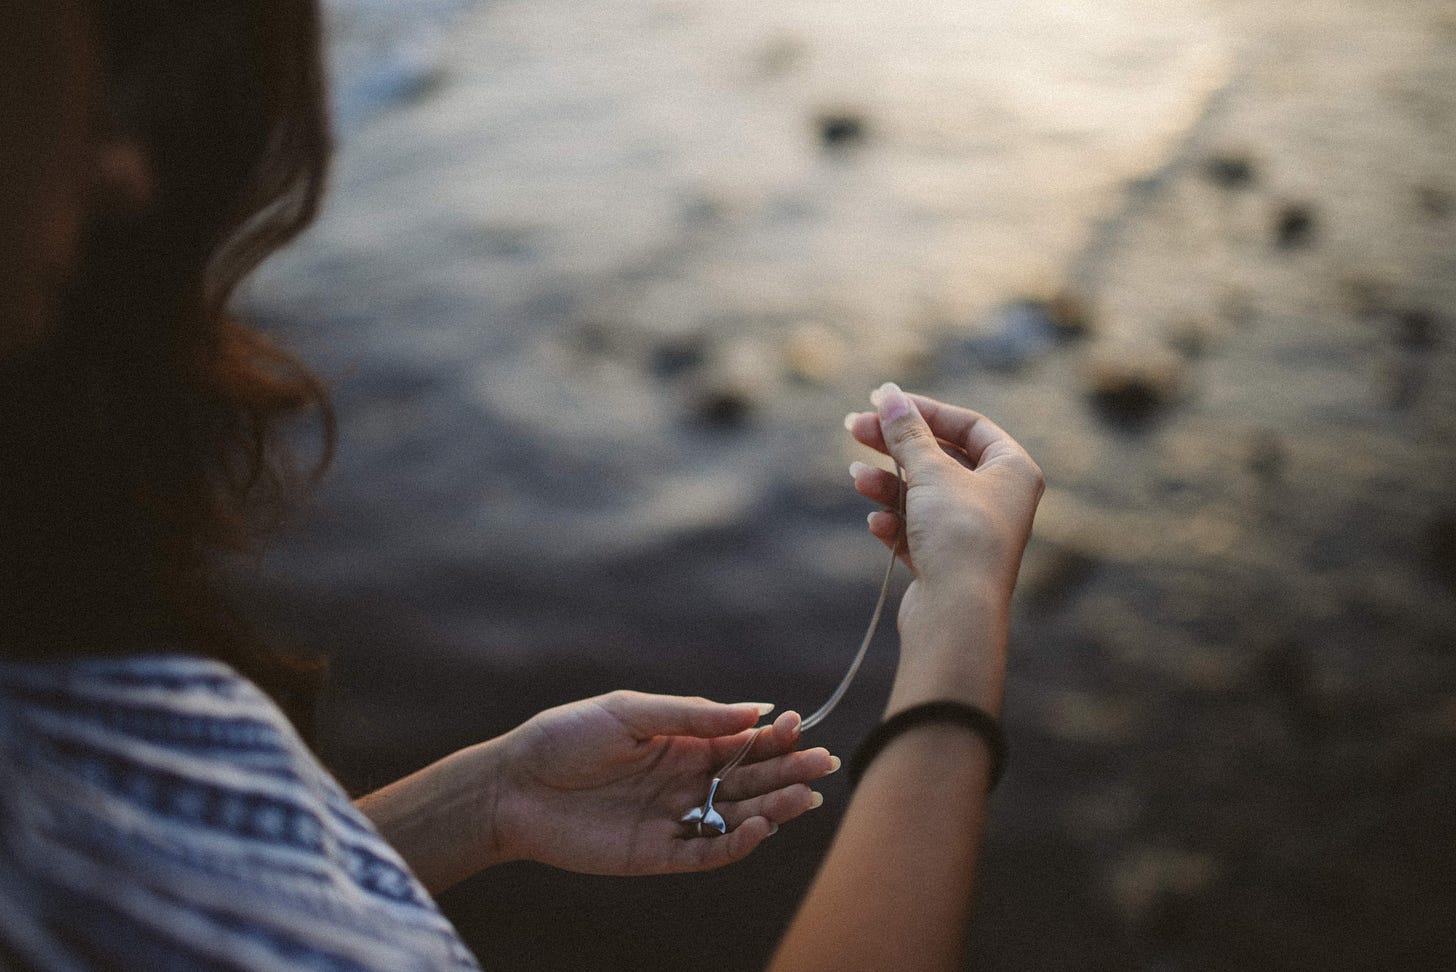 A woman stares longingly at a pendant that she holds in her hand on a beach.